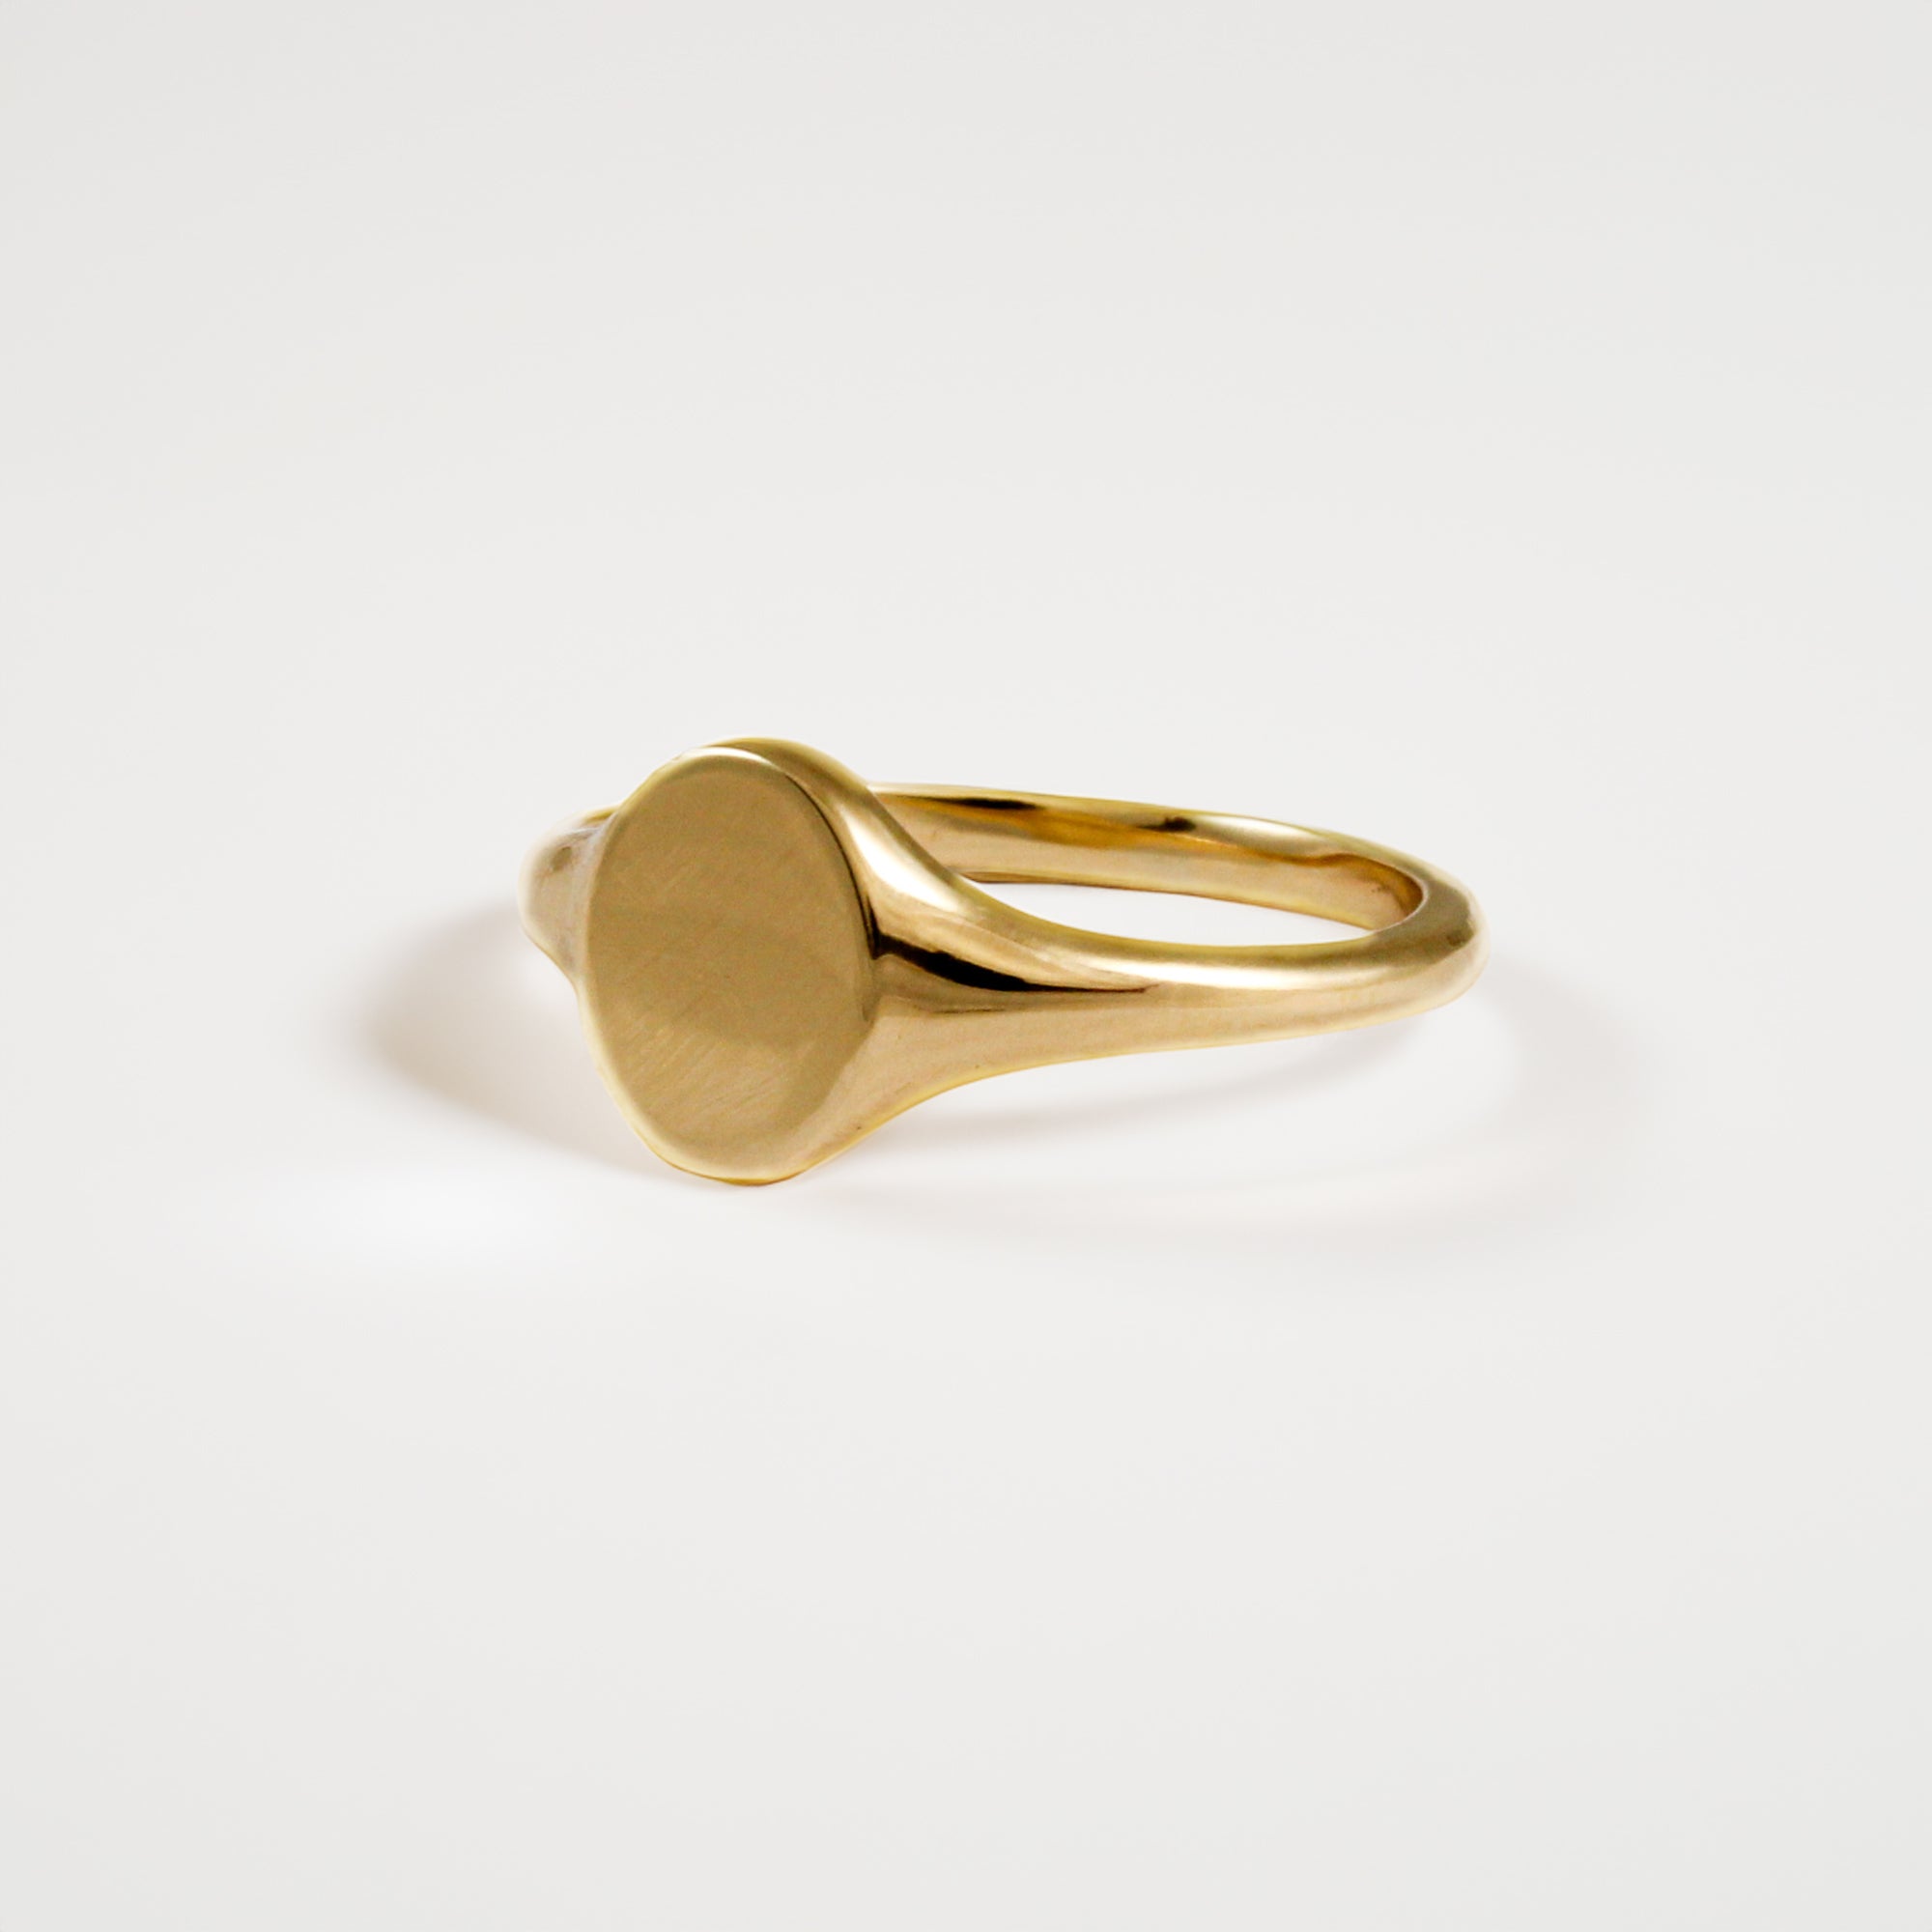 solid 9k gold oval mens or women signet ring 100% recycled gold